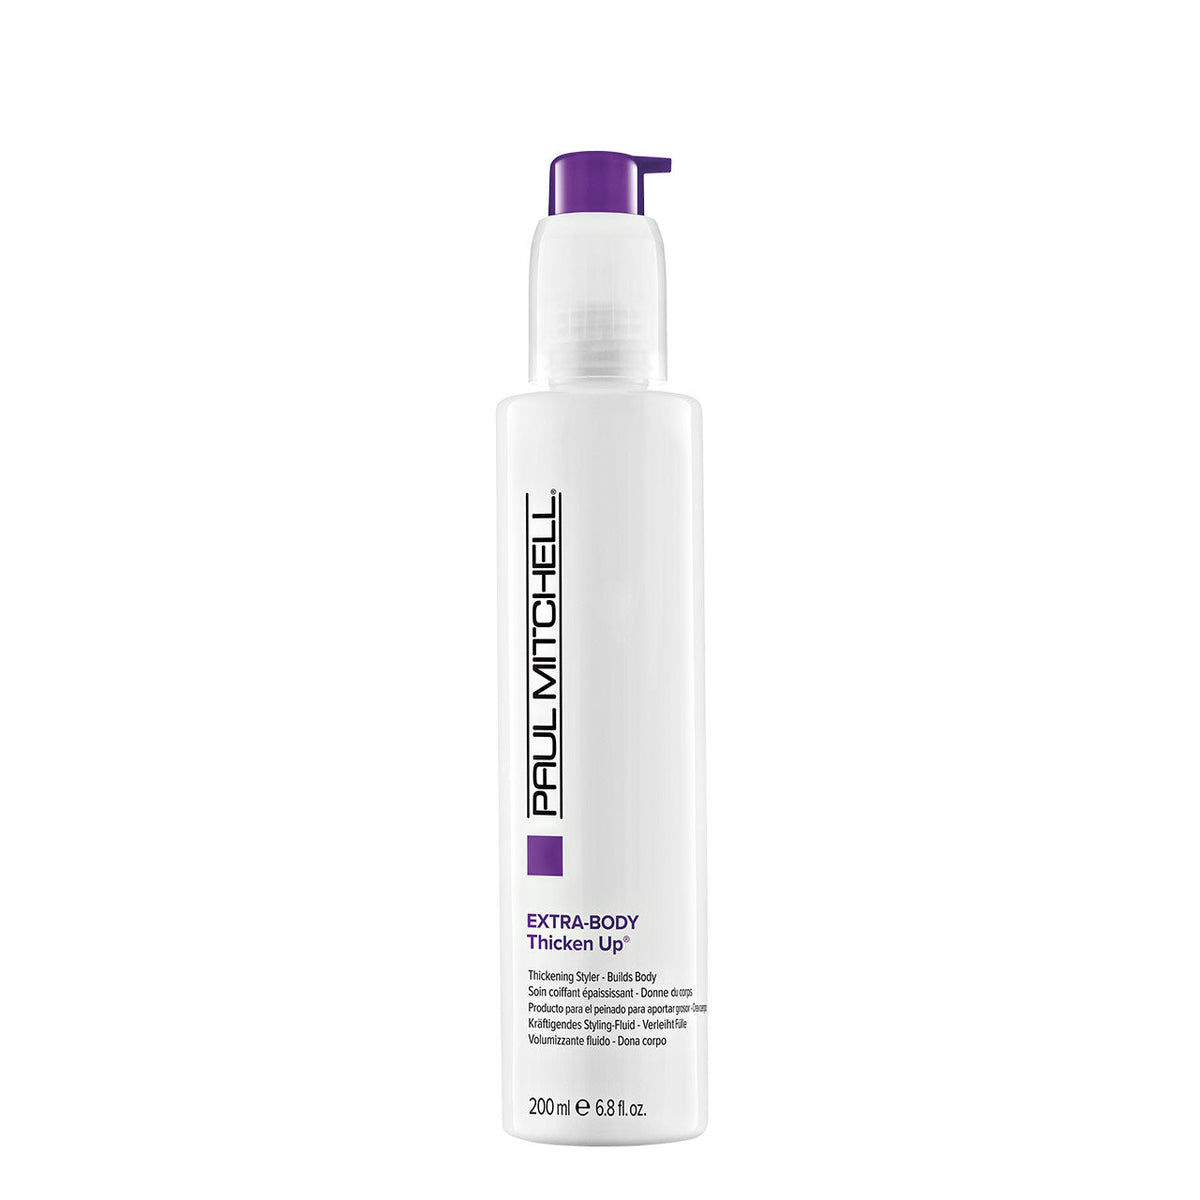 Extra-Body Thicken Up Styling Liquid - by Paul Mitchell |ProCare Outlet|